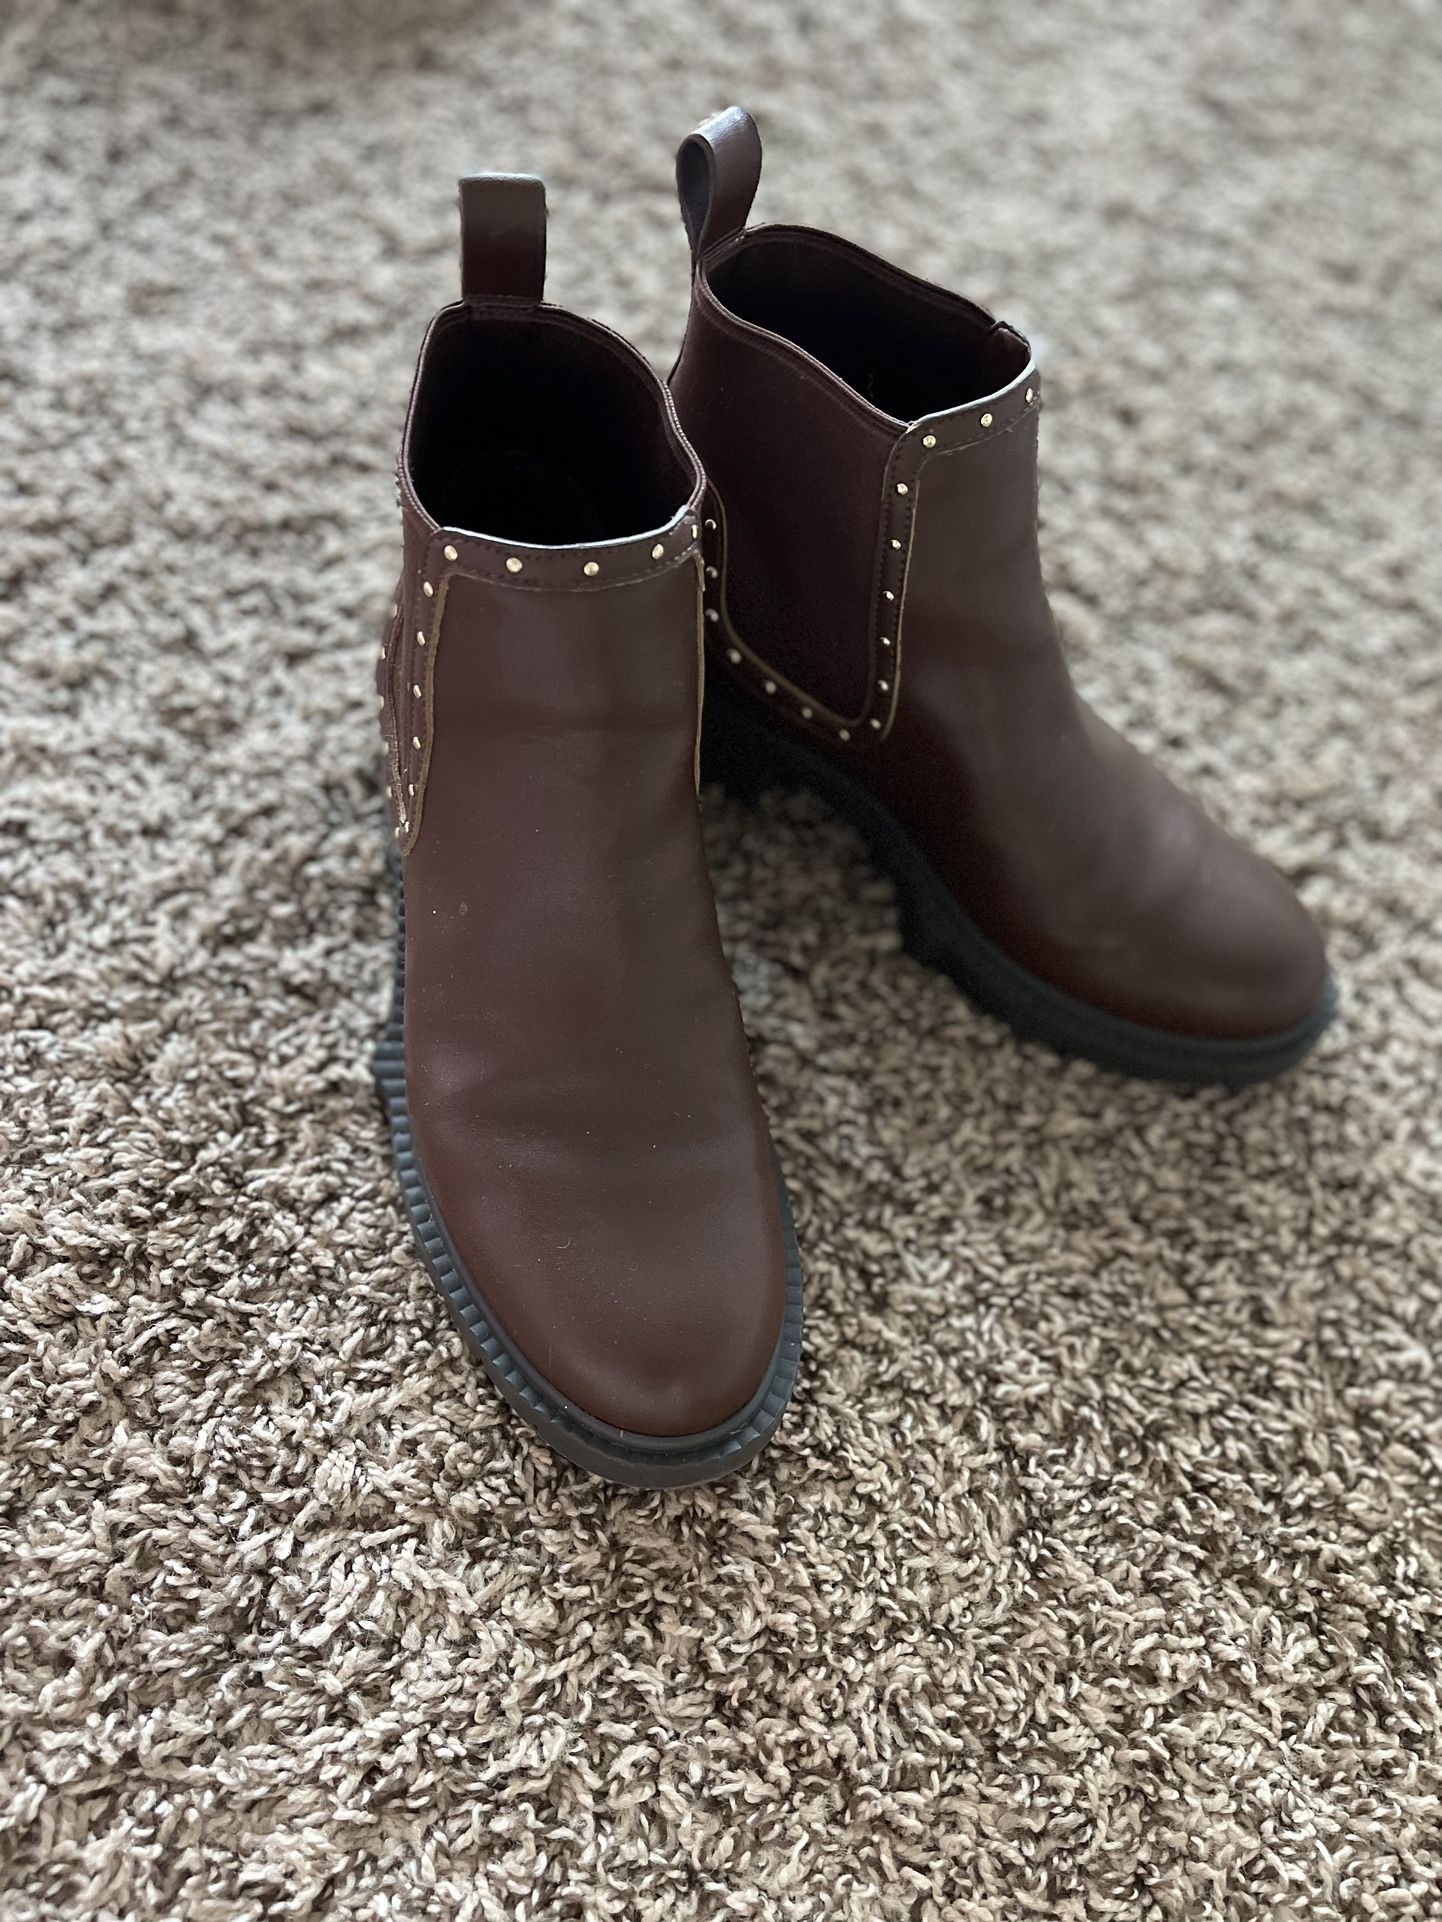 Coach Ankle Boots- Brown - Size 7